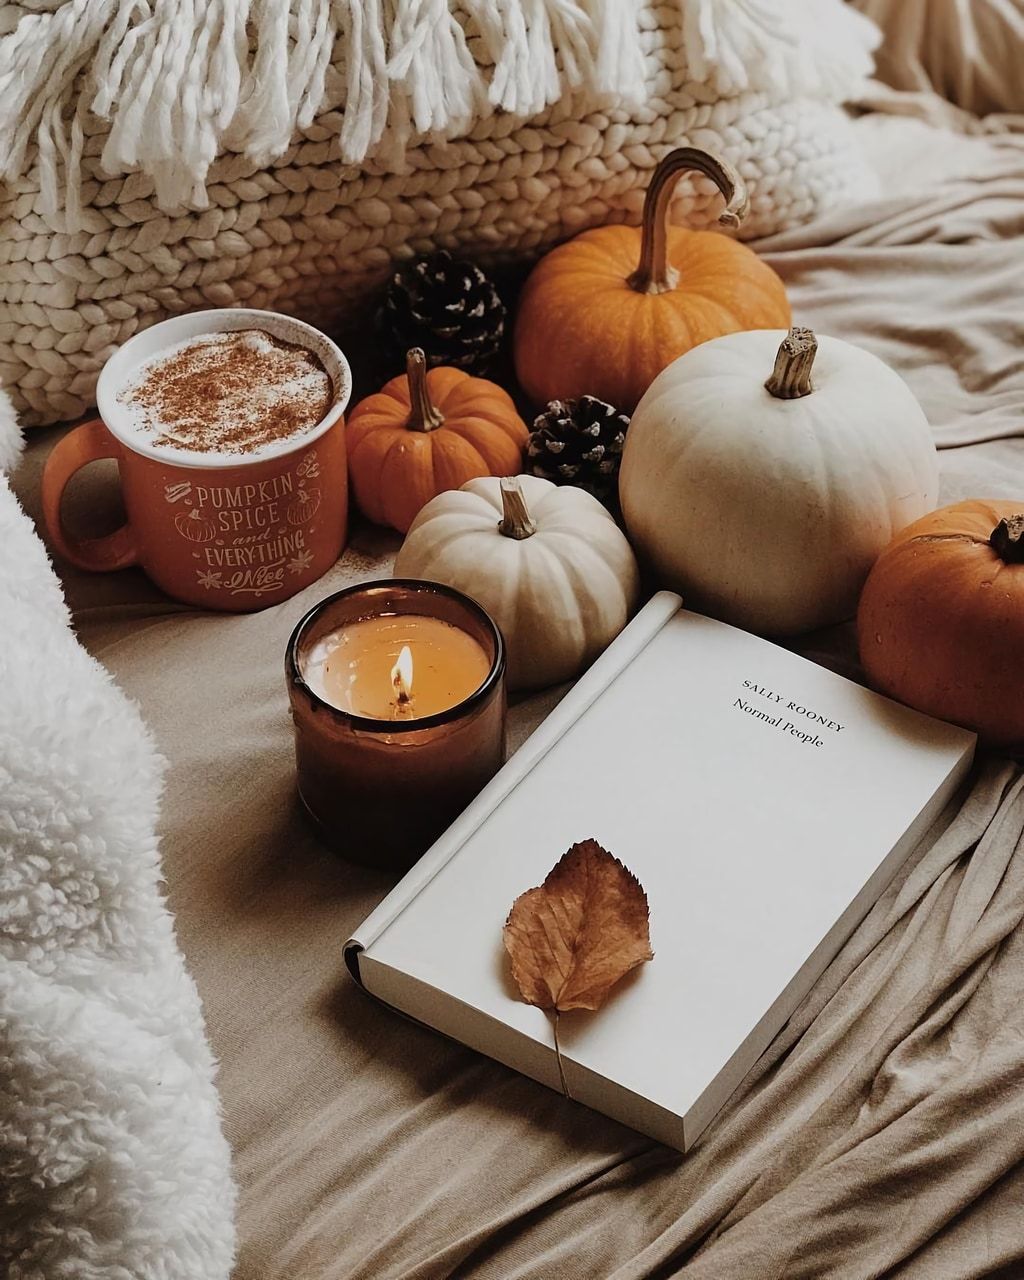 A book, candle and pumpkins on the bed - Cozy